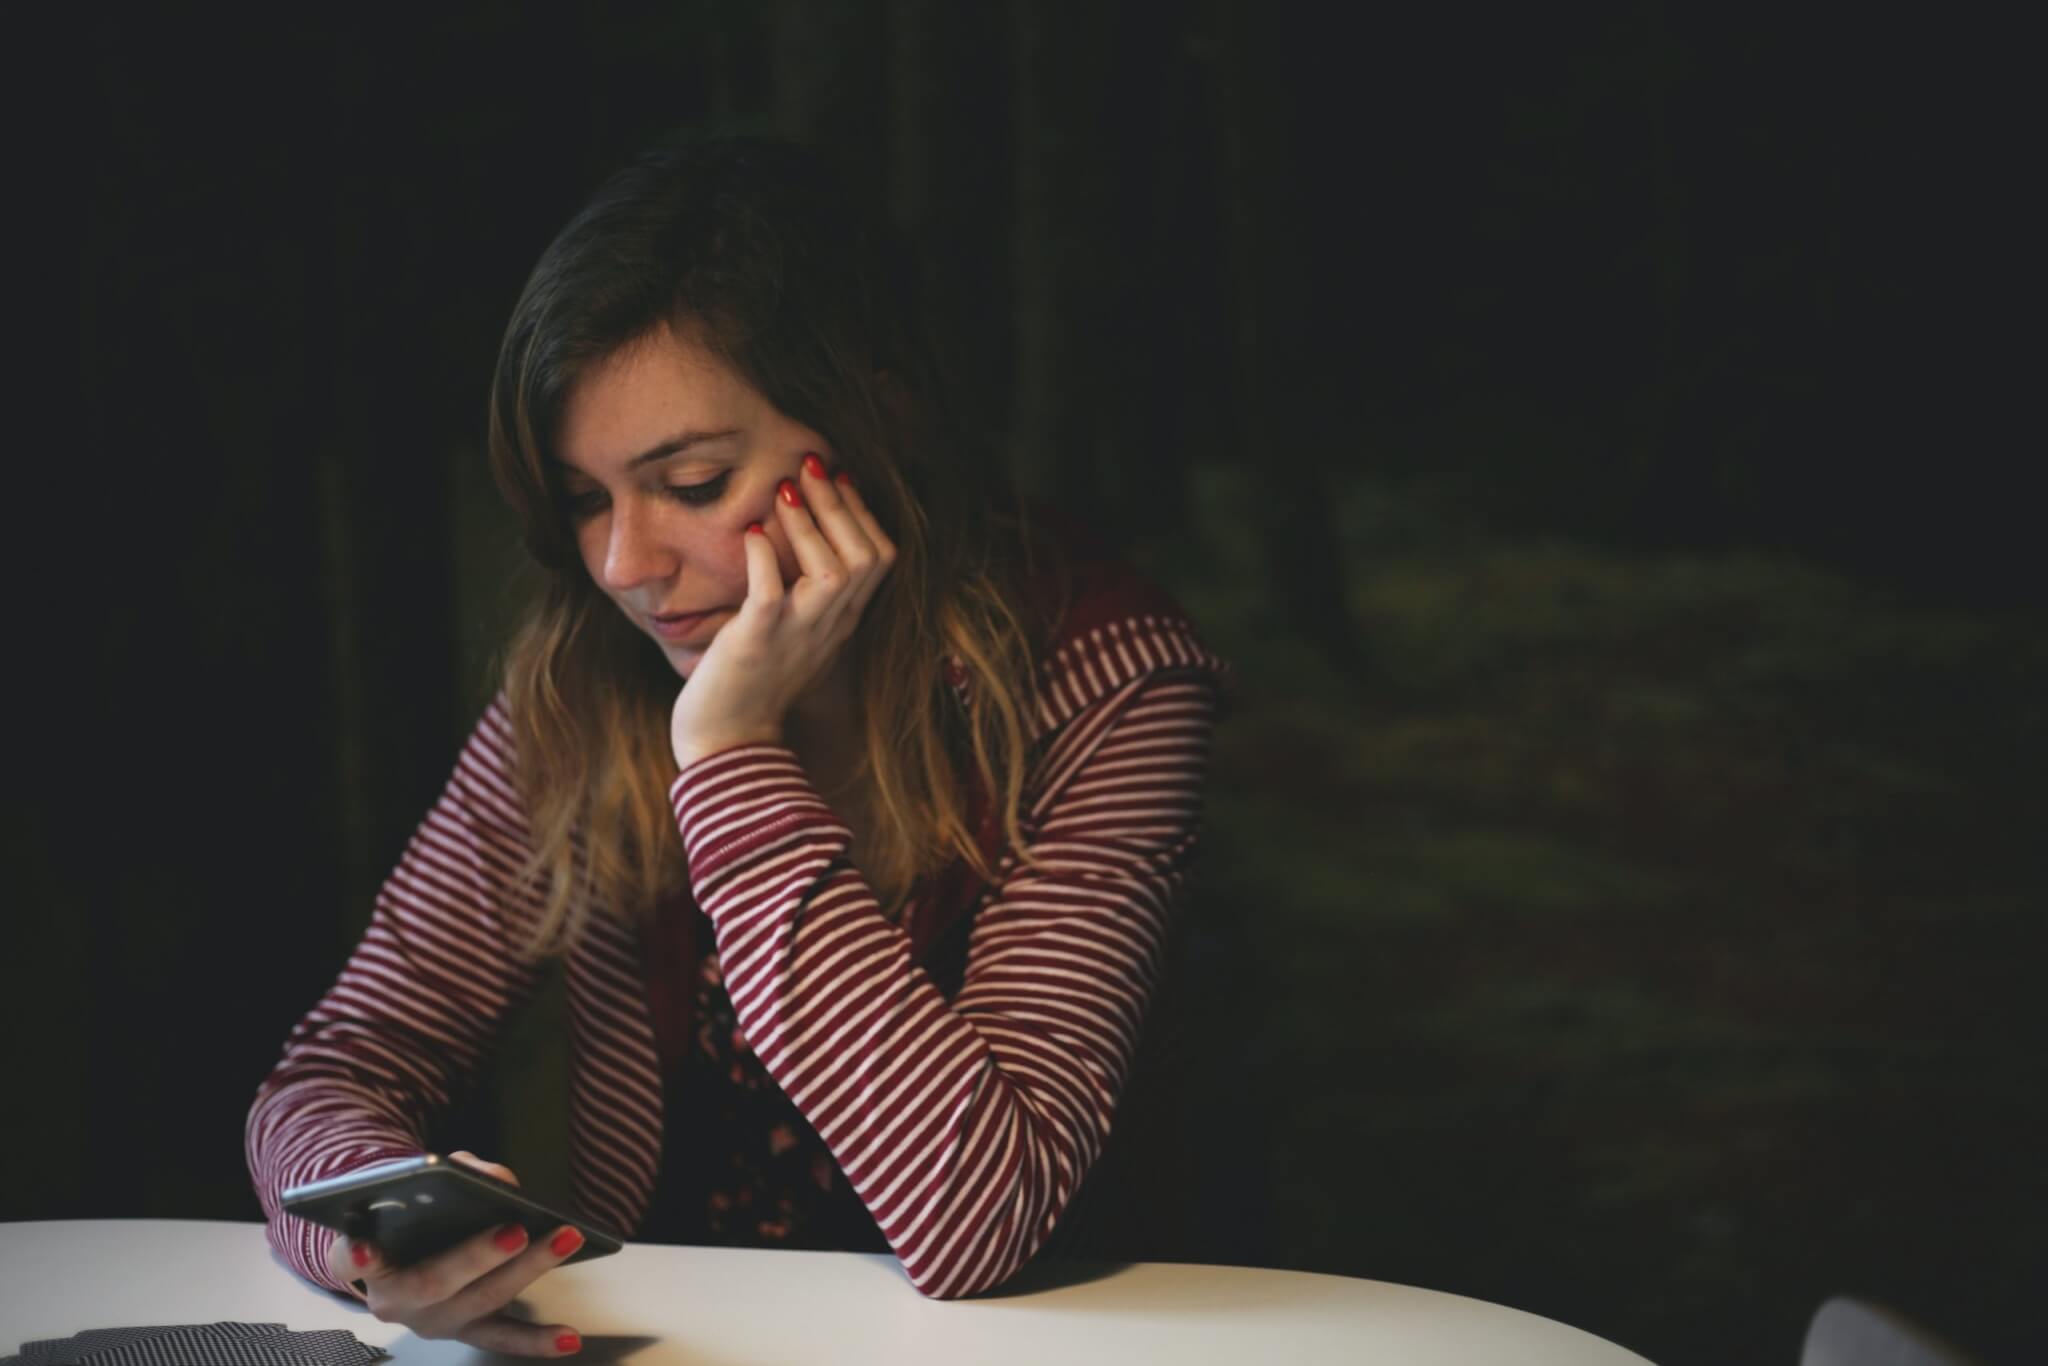 Woman alone, sad while looking at smartphone